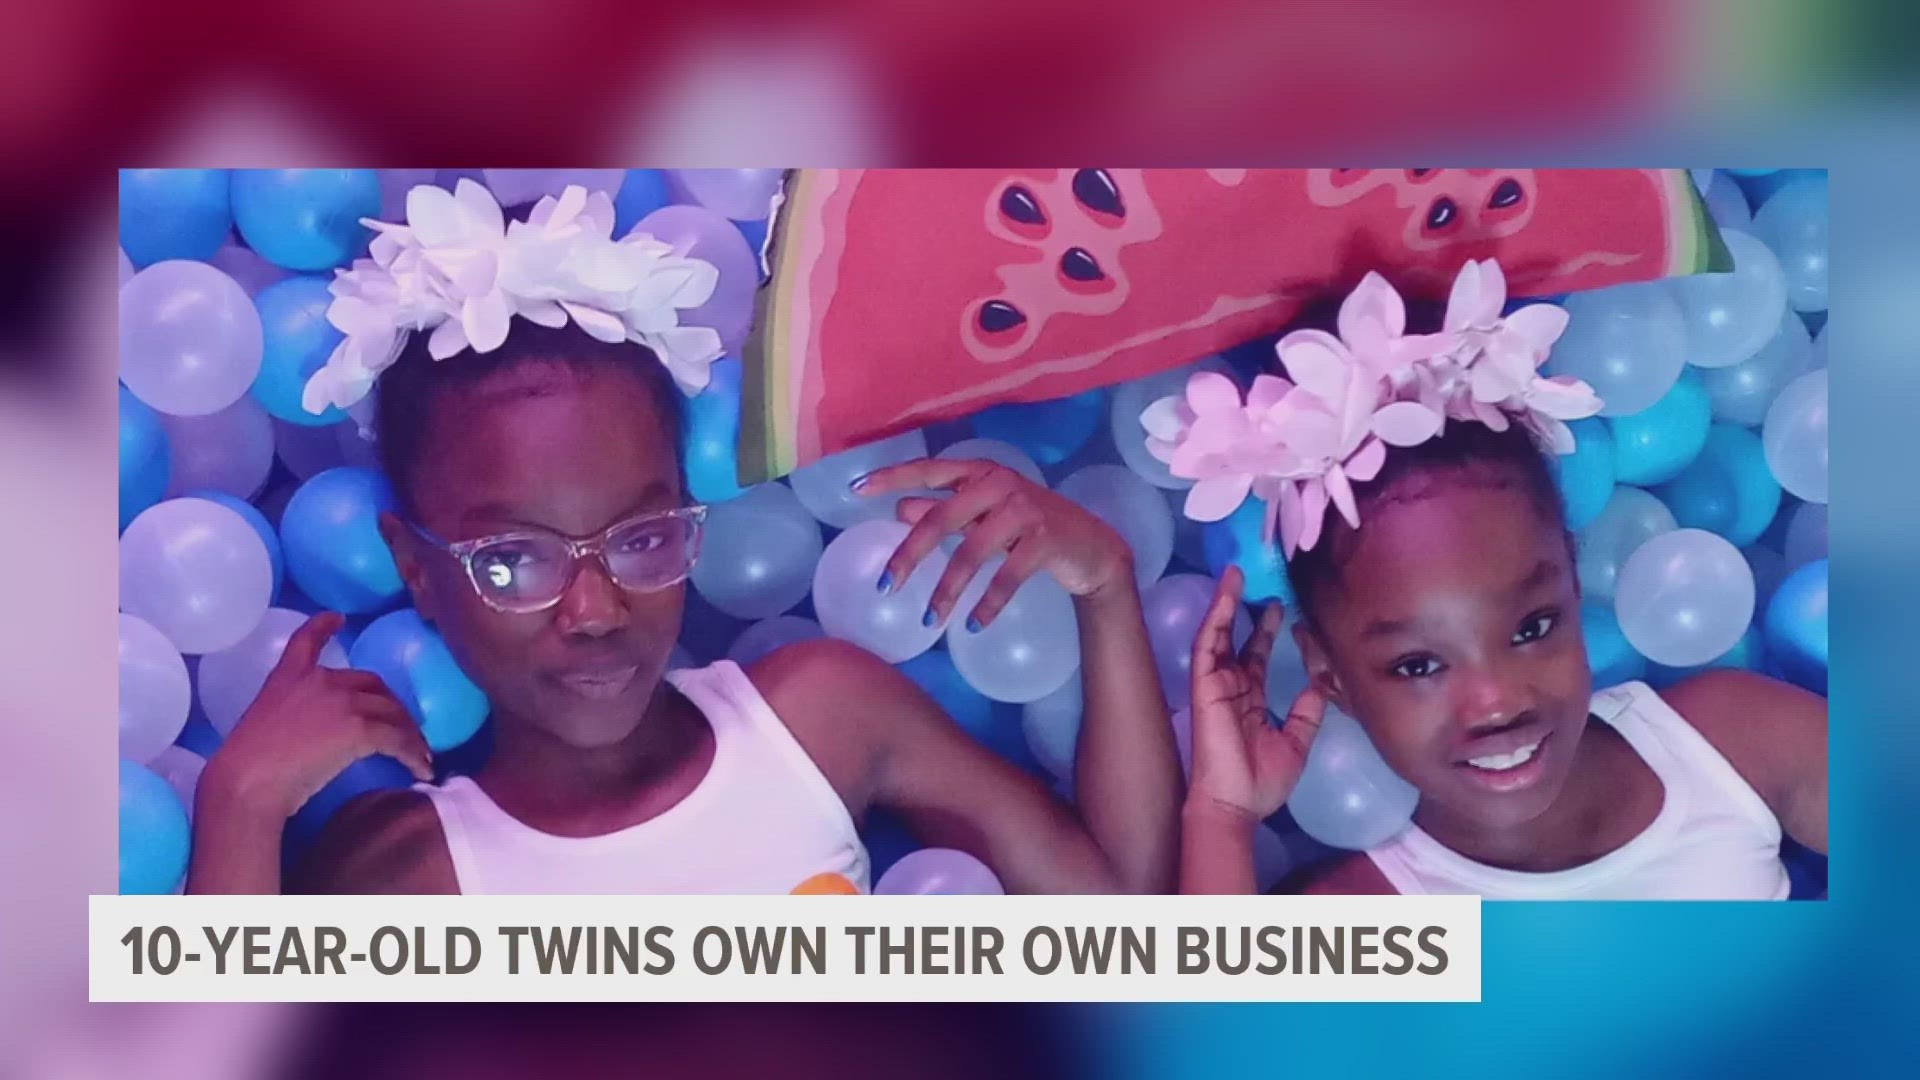 10-year-old twins run their own business.